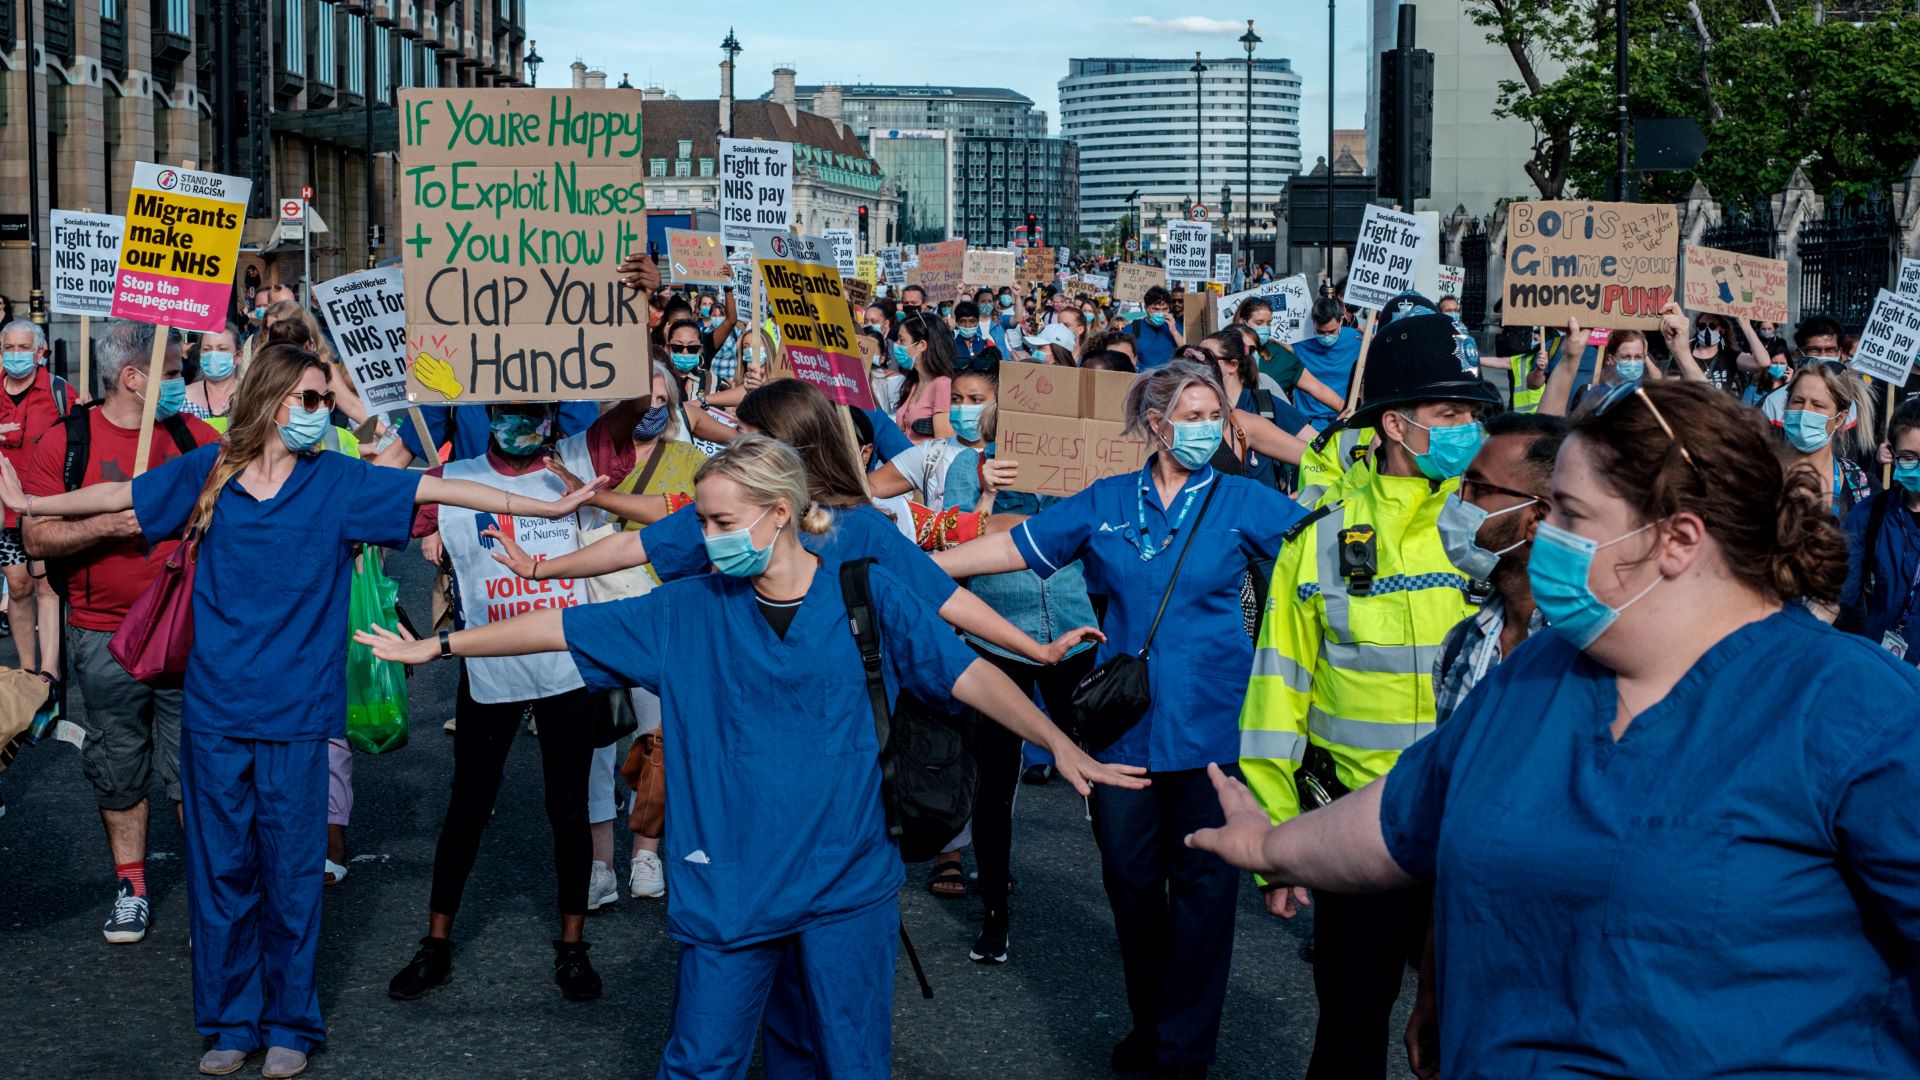 Nurses striking over pay and working conditions. Steven Daniels explores how union rights in the UK have been destroyed by Conservative governments.